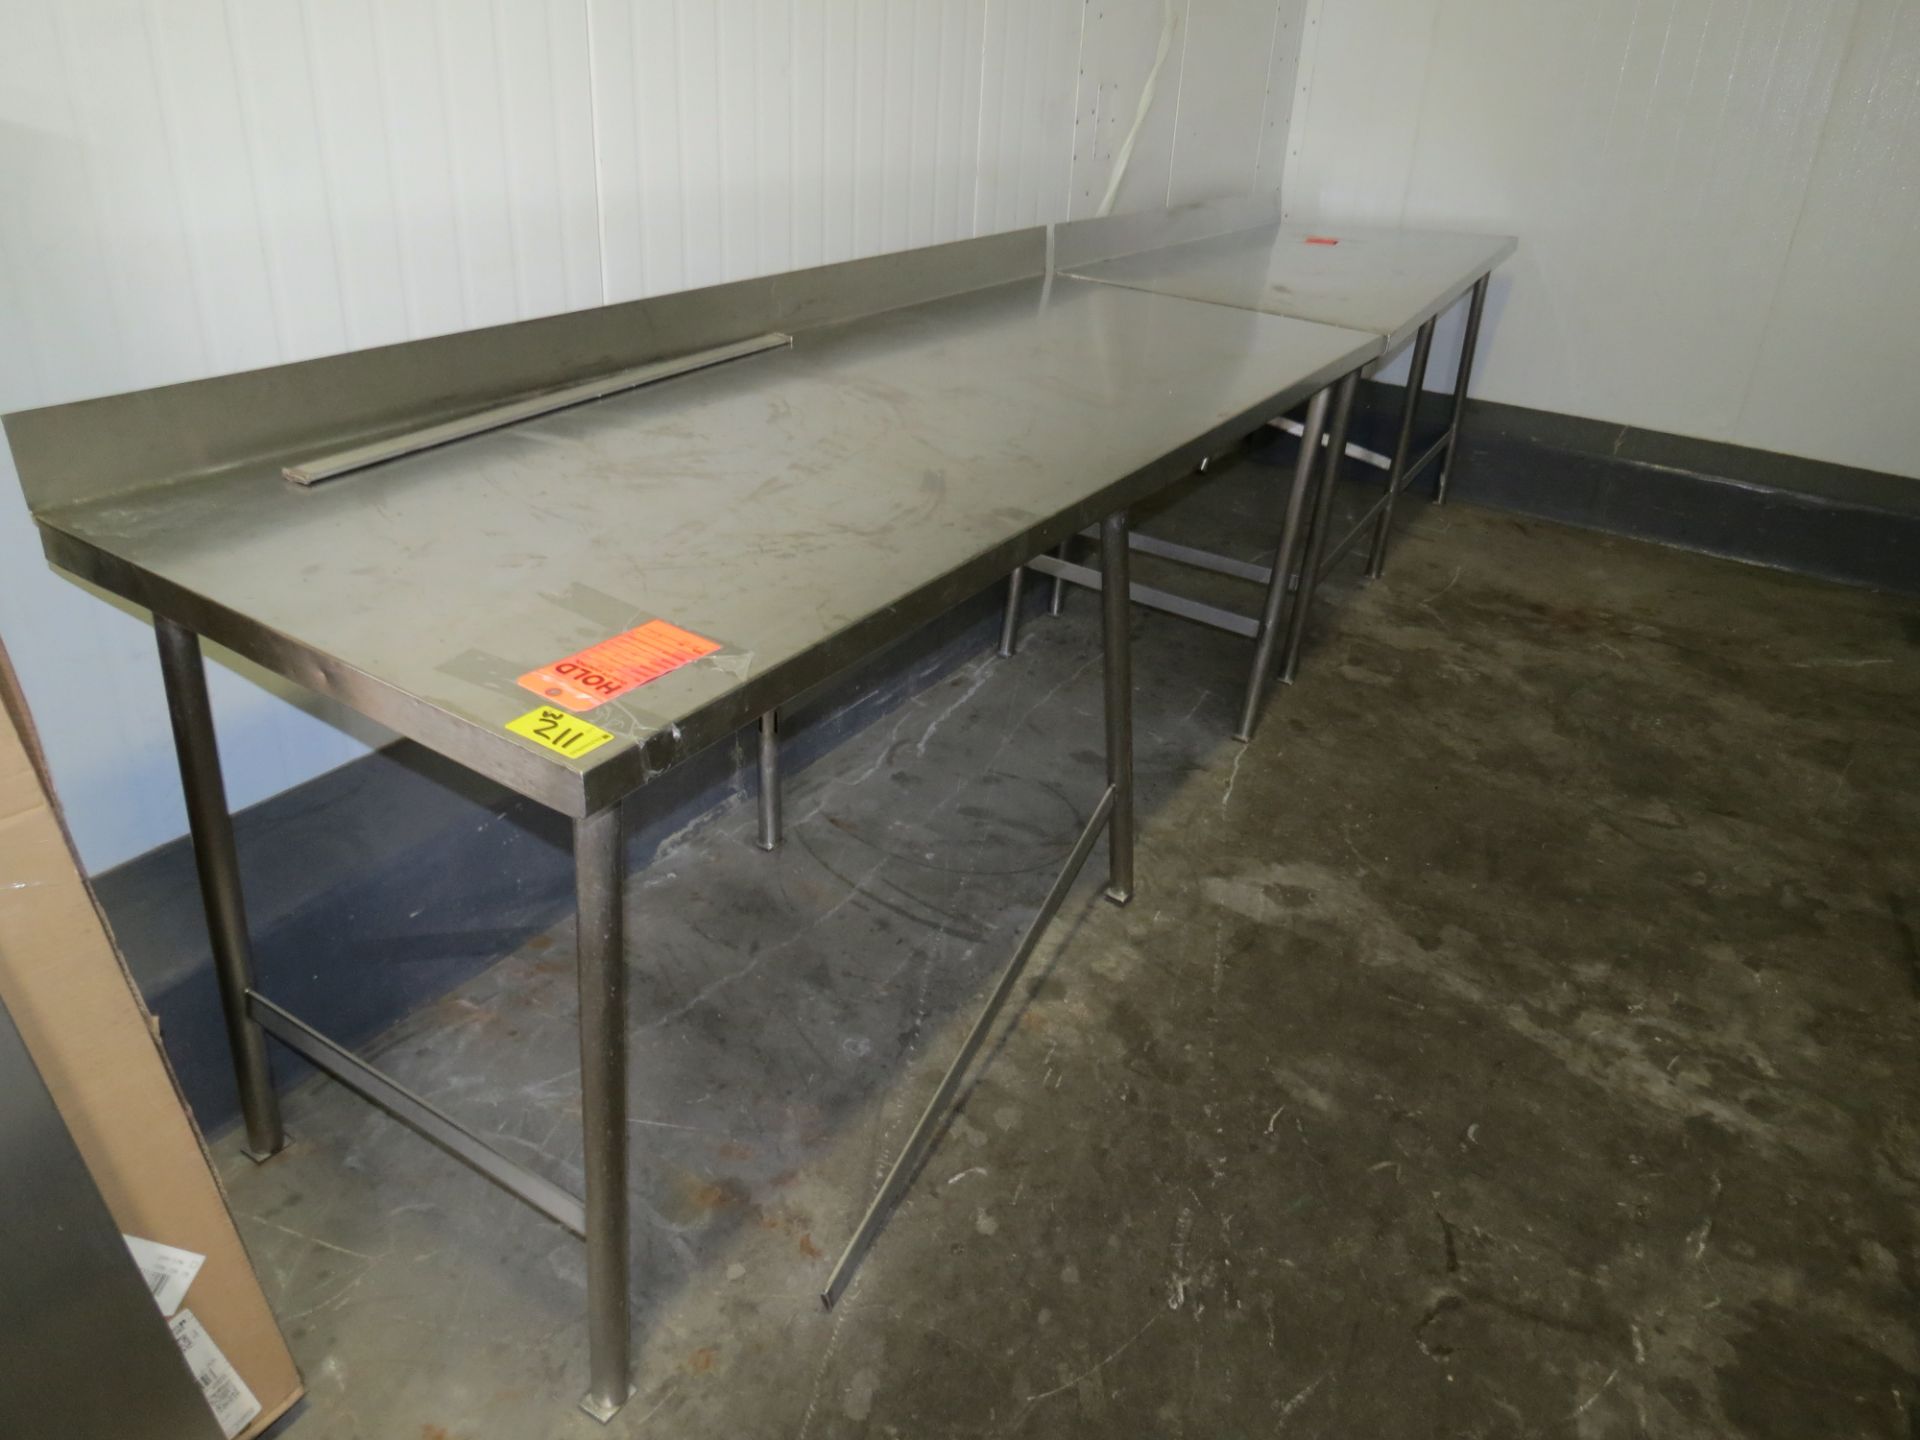 Lot of Damaged Stainless Steel Tables, Trays & Sanitizer Dispensers - Image 2 of 4